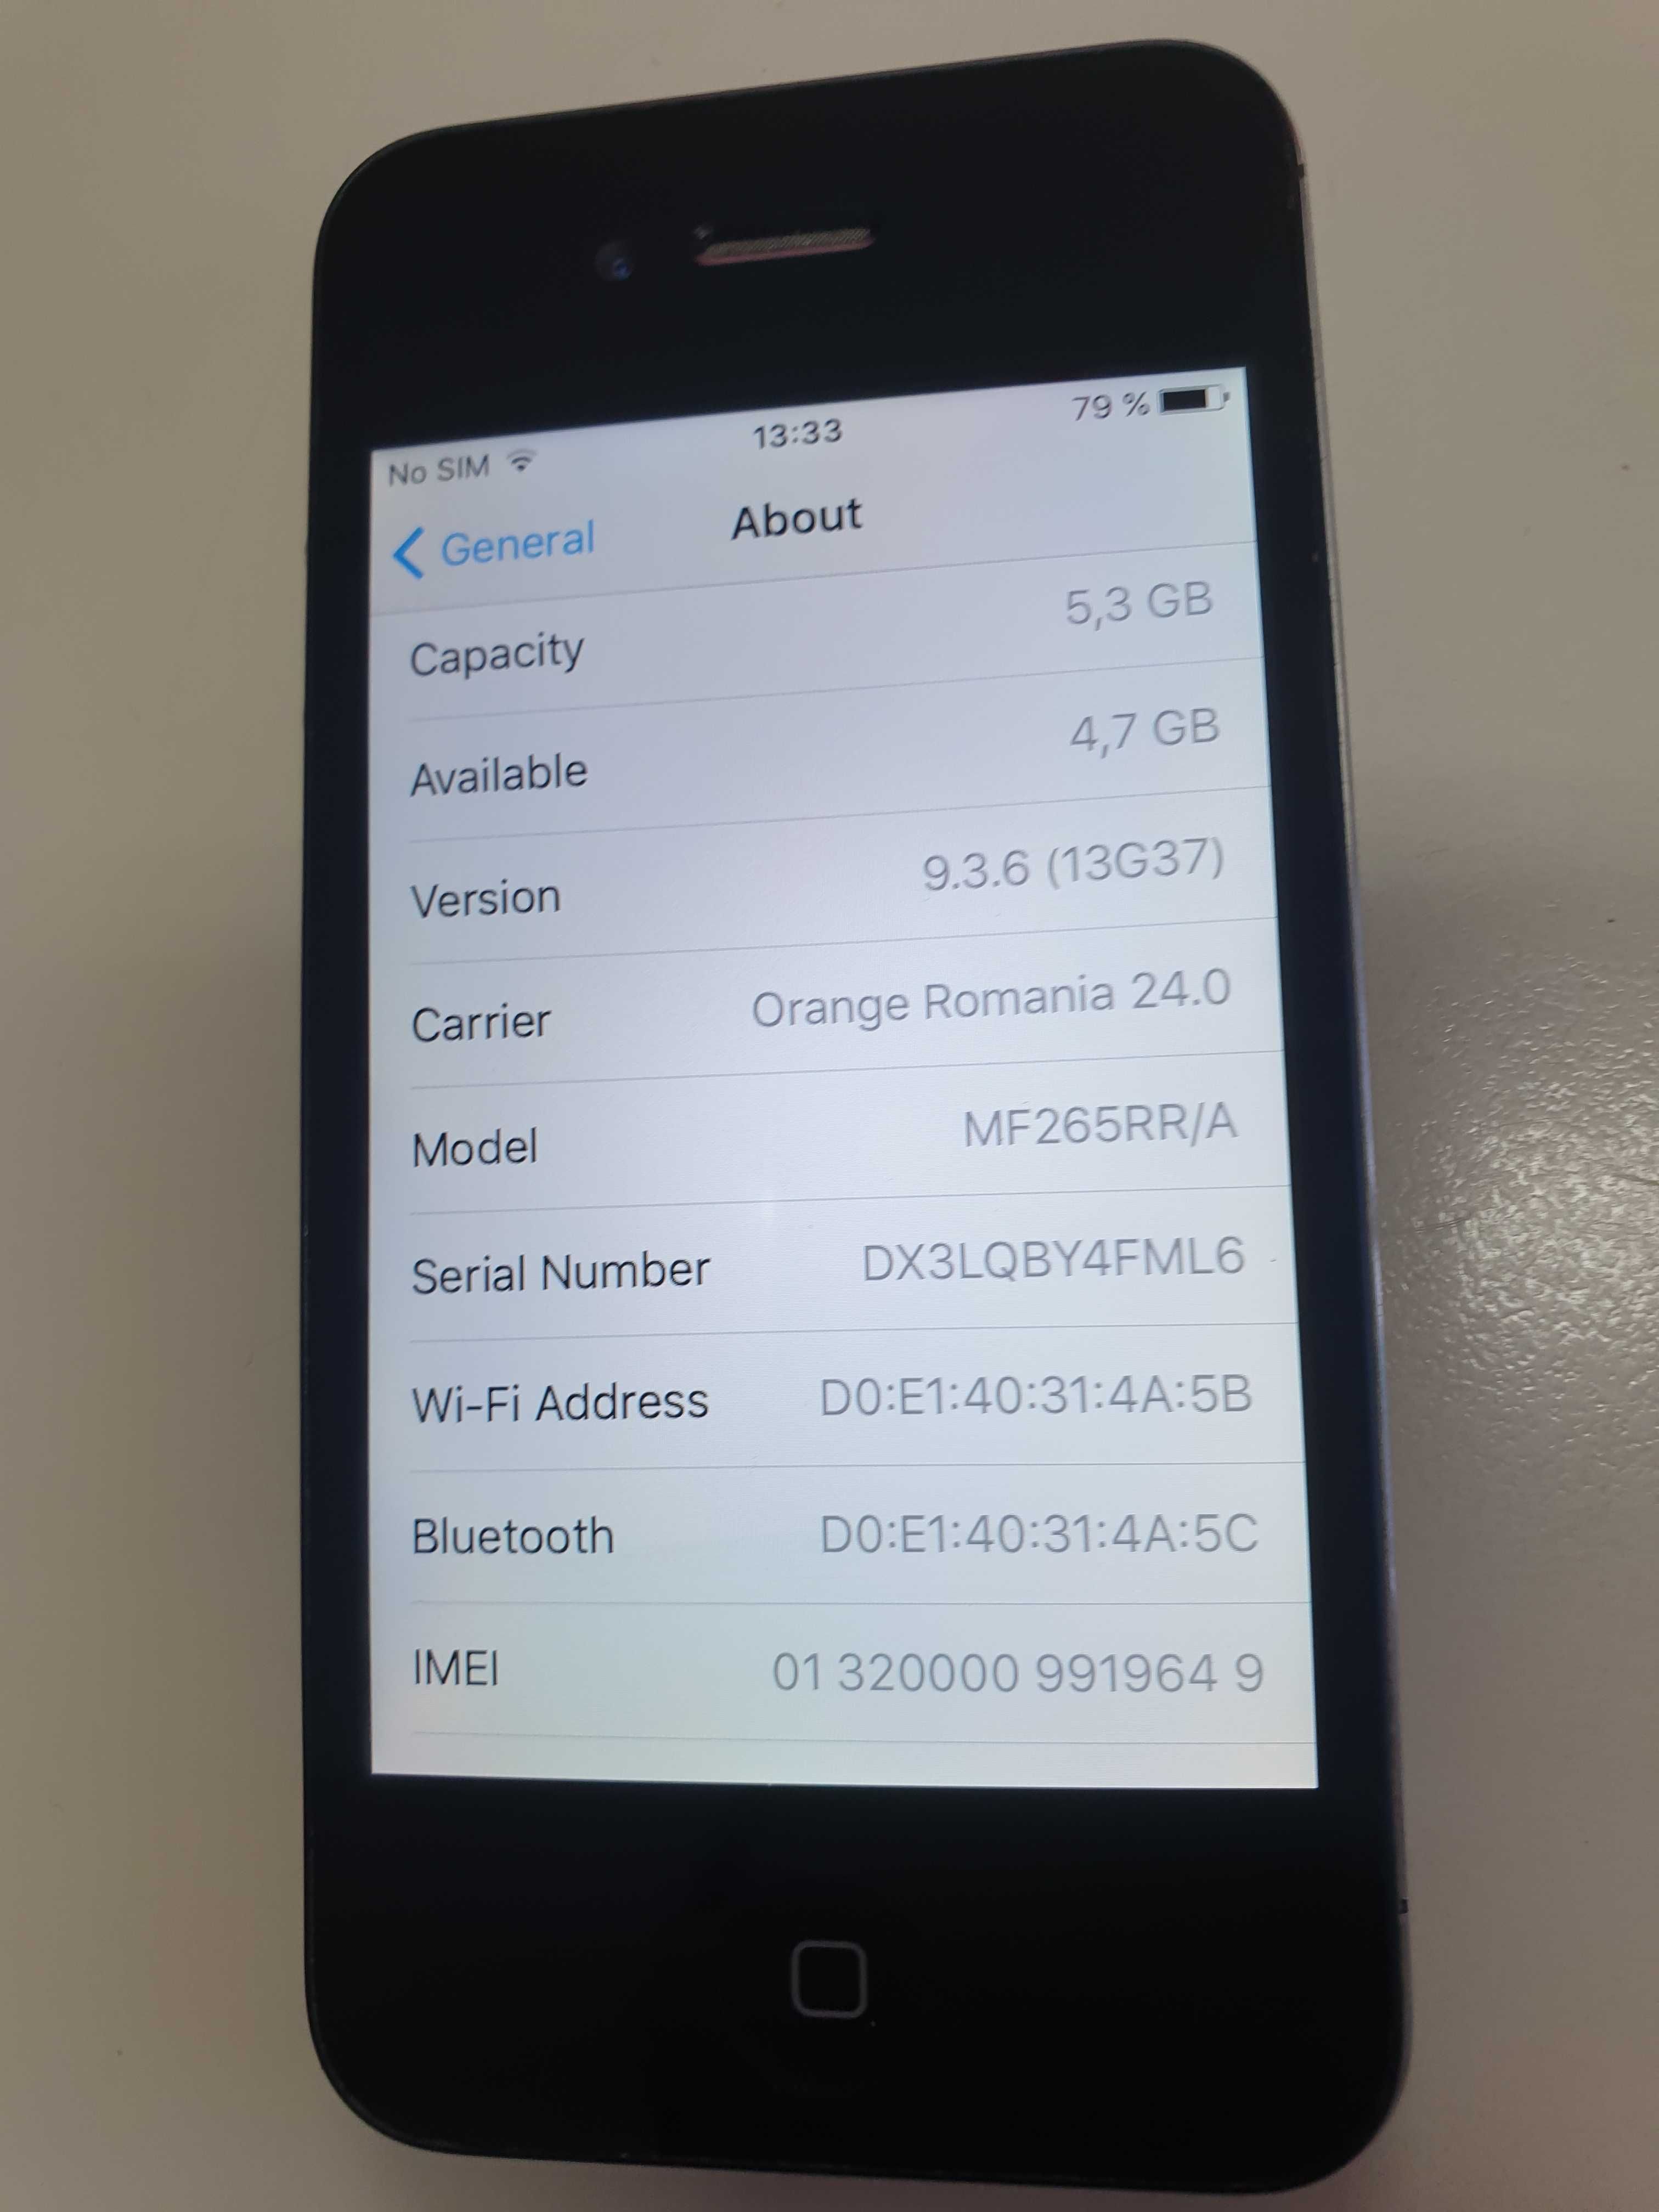 Apple iPhone 4s, iOS 9.3.6, perfect functional